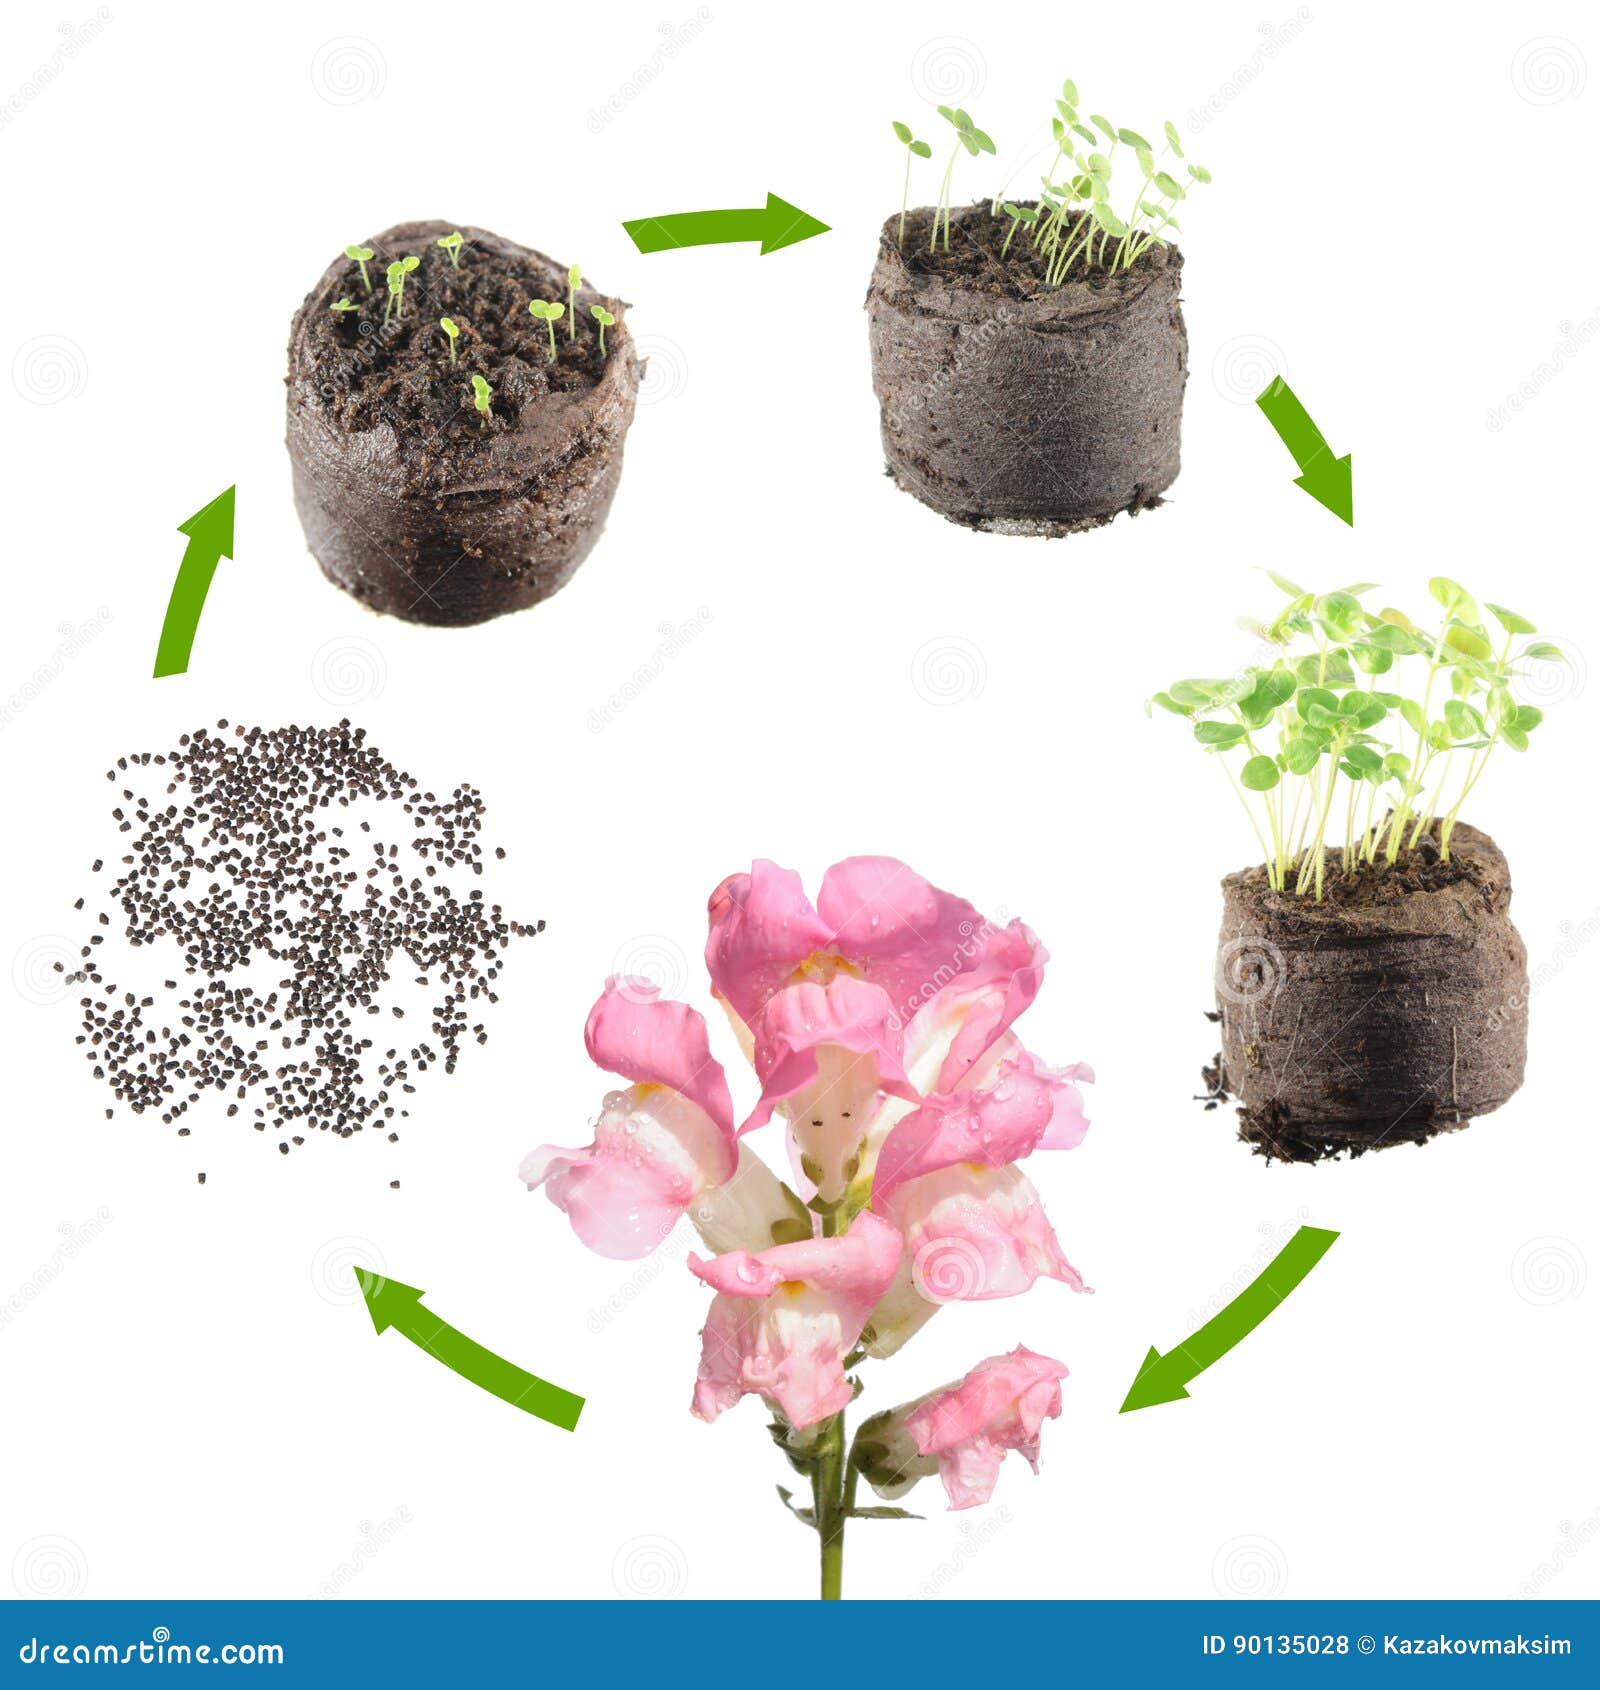 Life Cycle Of Plant Stages Of Growth Of Snapdragon From Seed Stock Photo Image Of Life Change 90135028